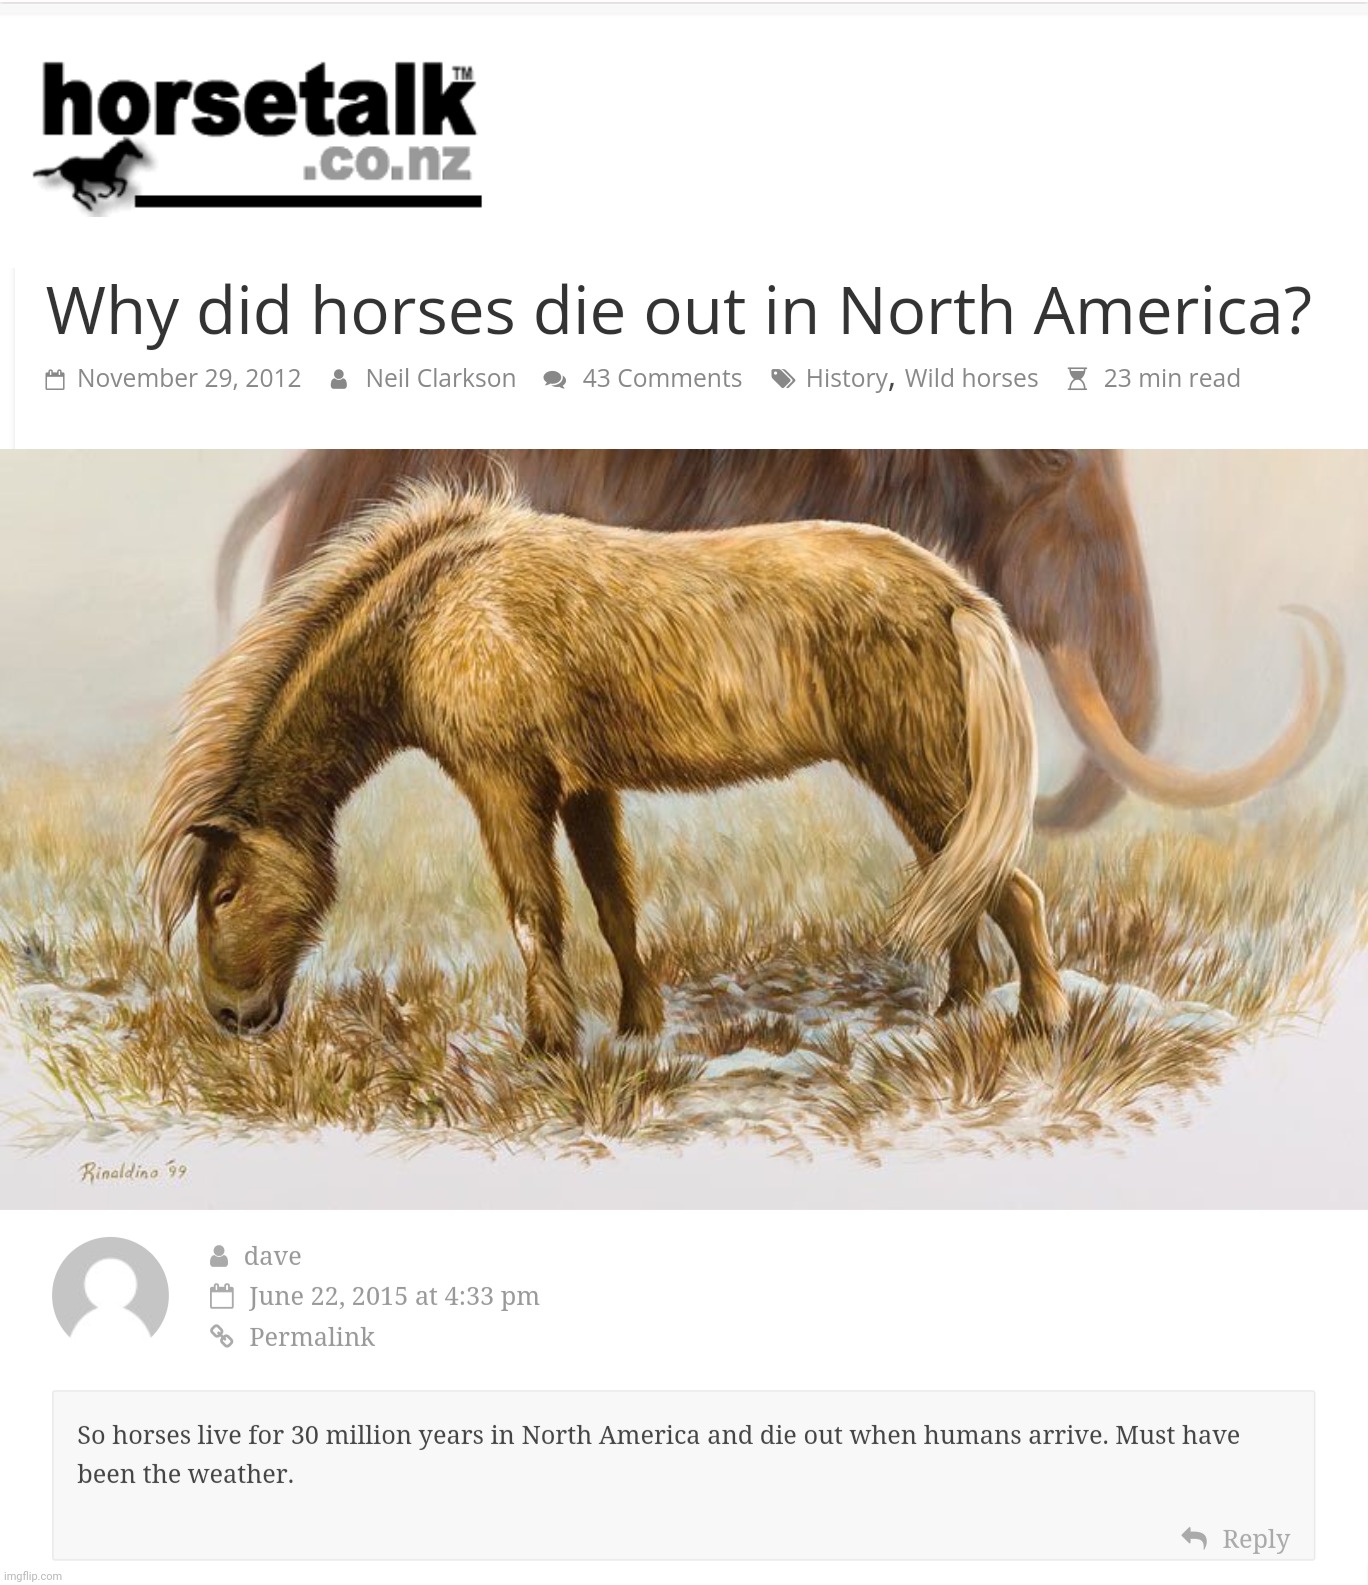 After 35 million years, horses died out in North America because it had no more ice glaciers to eat. 5000 - 6000ya. | image tagged in horses,prehistoric horses,why did horses die out in north america,horse,mega fauna extinction lies | made w/ Imgflip meme maker